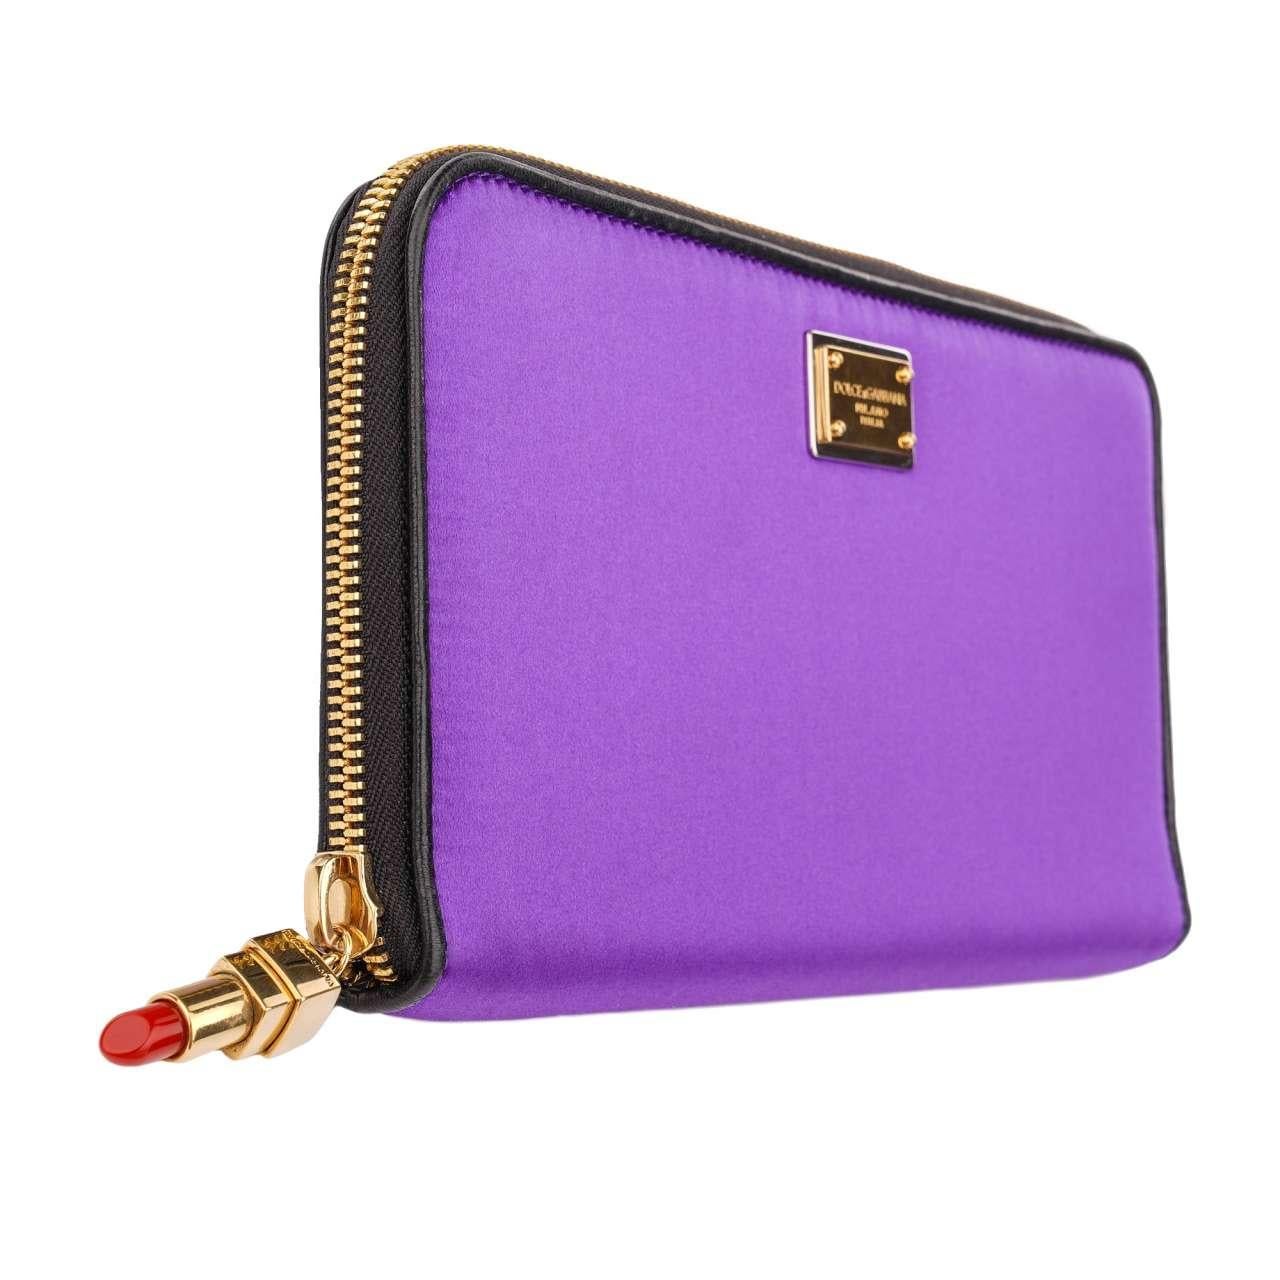 - Small Bag / Clutch with DG Logo Plate and metal red Lipstick Pendant in purple and gold by DOLCE & GABBANA - New with Tag - Material: 57% Viscose, 27% Silk, 16% Lambskin - Interior: one open pocket with Logo - Front flap with DG Plate Logo - Light